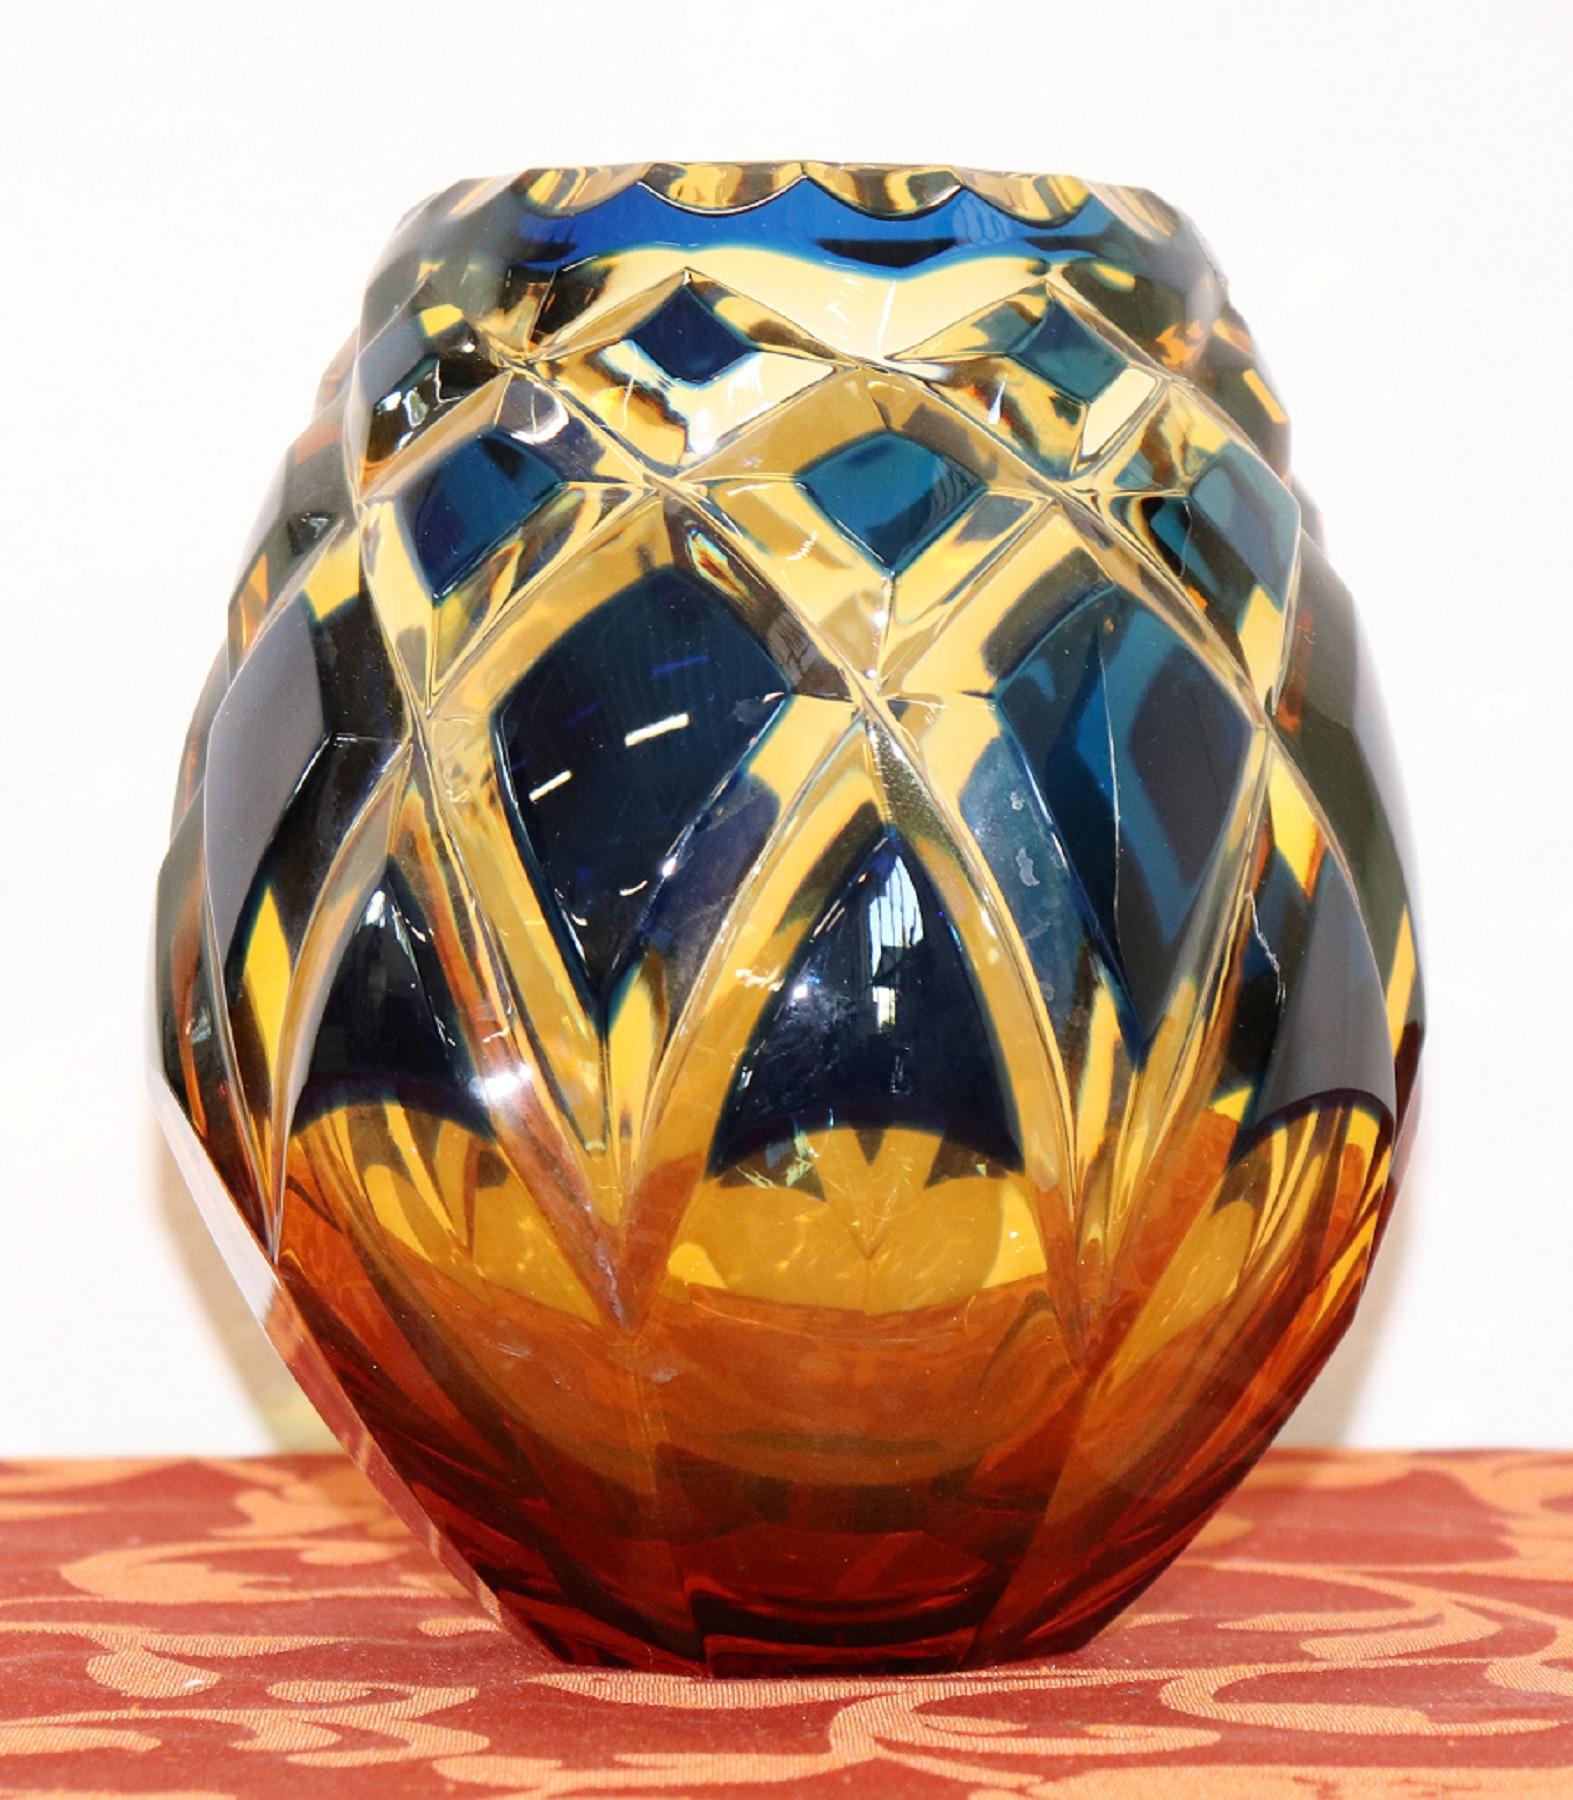 Refined crystal vase in blue and amber decorated with rhombs. Signed Agarthi.